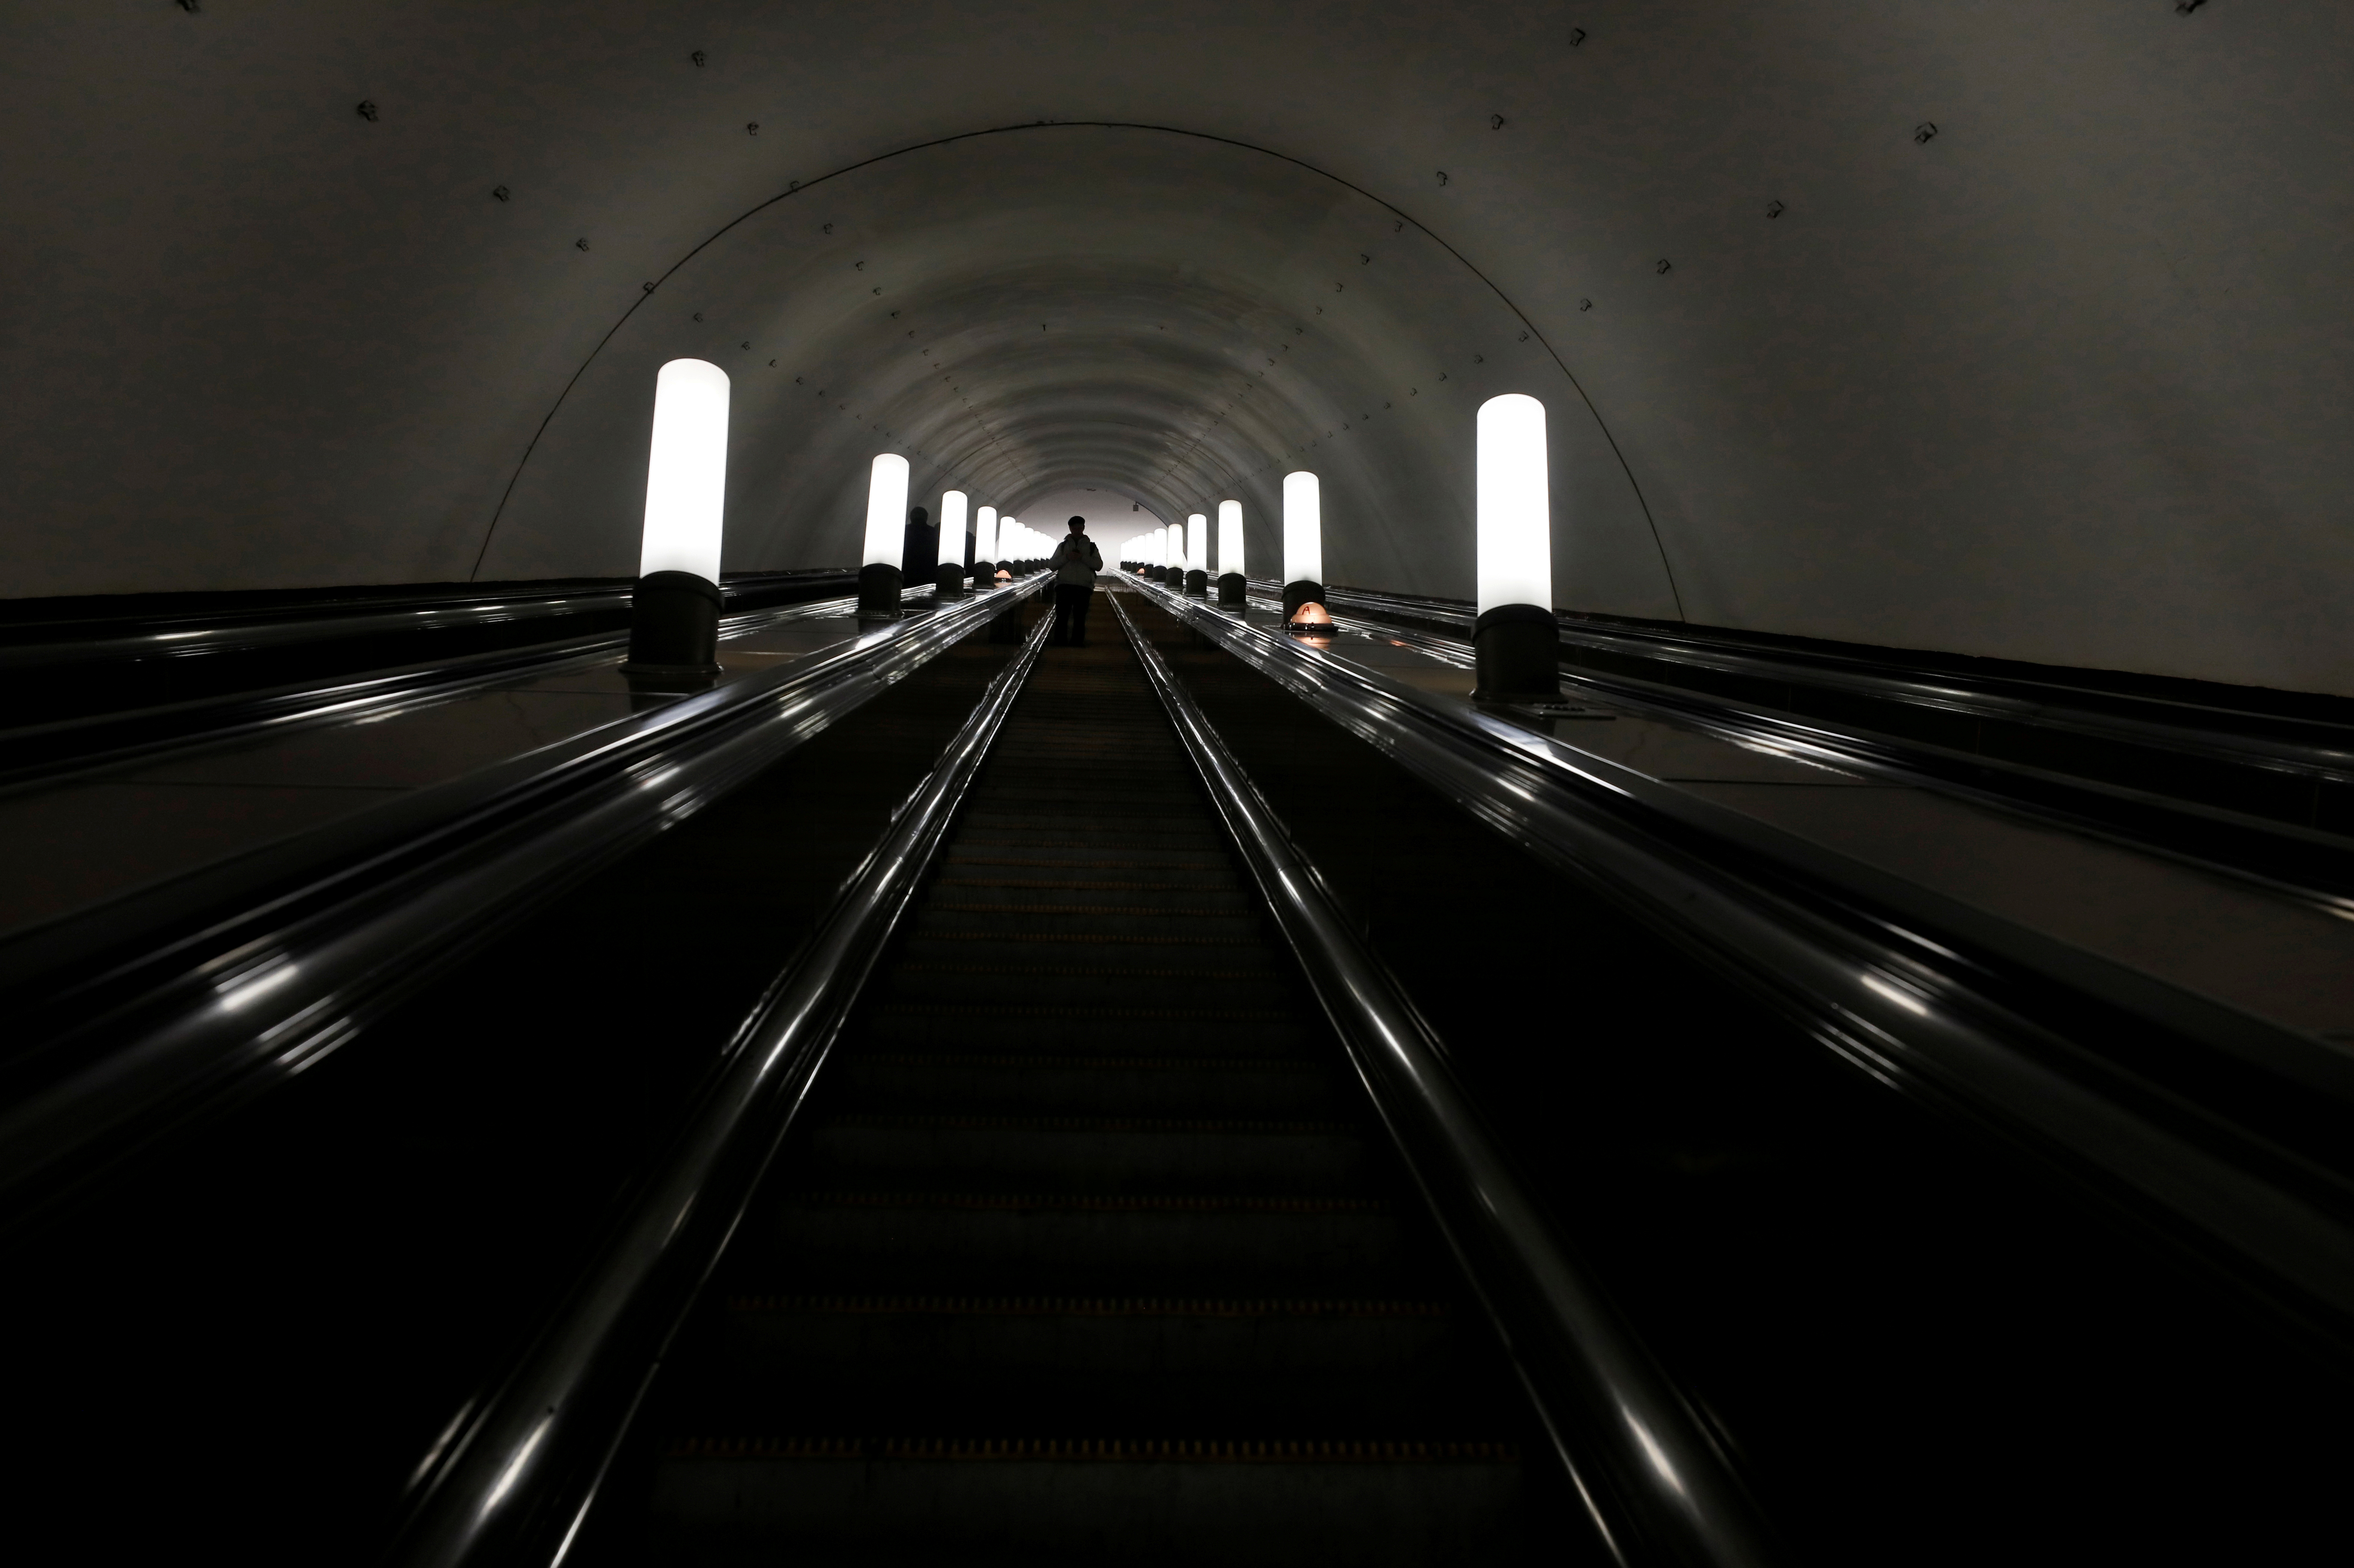 A passenger rides an escalator at a metro station in Moscow